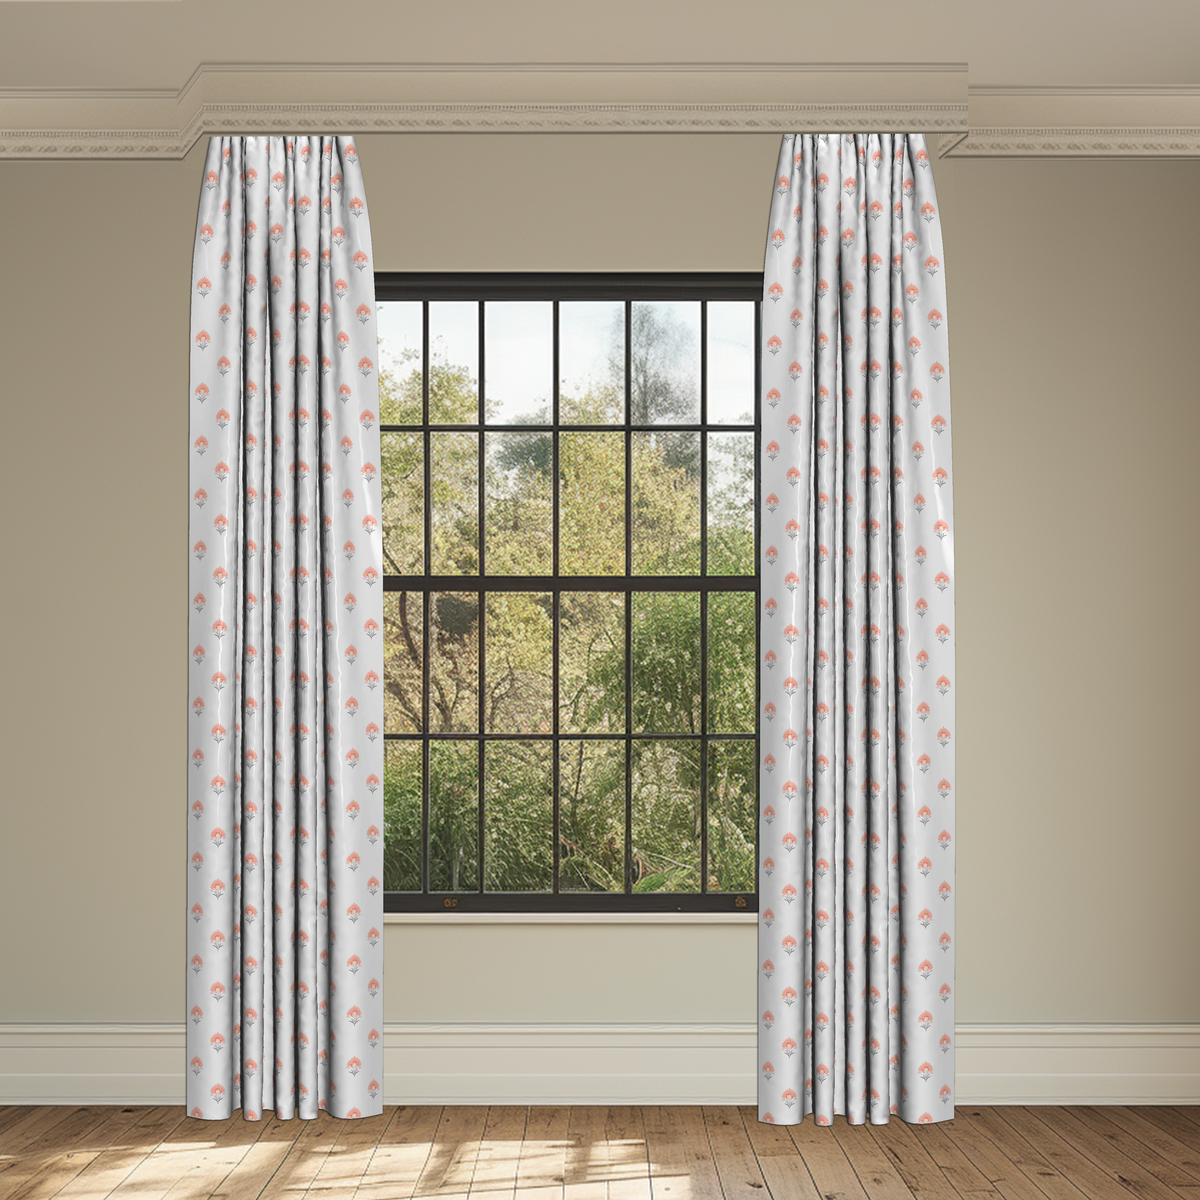 Adelaide Mimosa Made to Measure Curtains